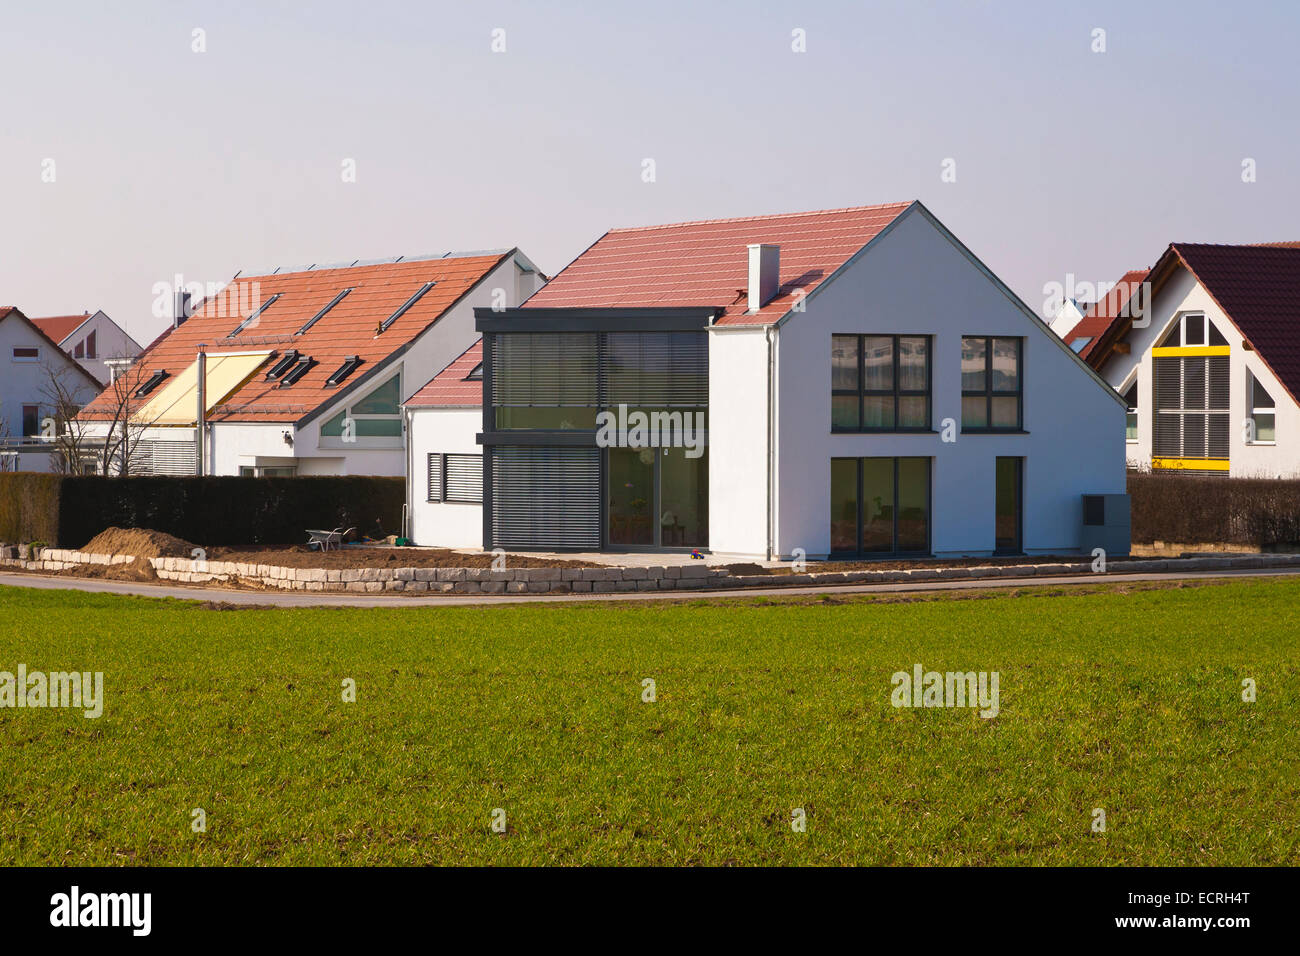 MODERN DETACHED HOUSES, NEW BUILDING, FAMILY HOME,  DWELLING HOUSE, RESIDENTIAL AREA, FELLBACH, BADEN-WURTTEMBERG, GERMANY Stock Photo